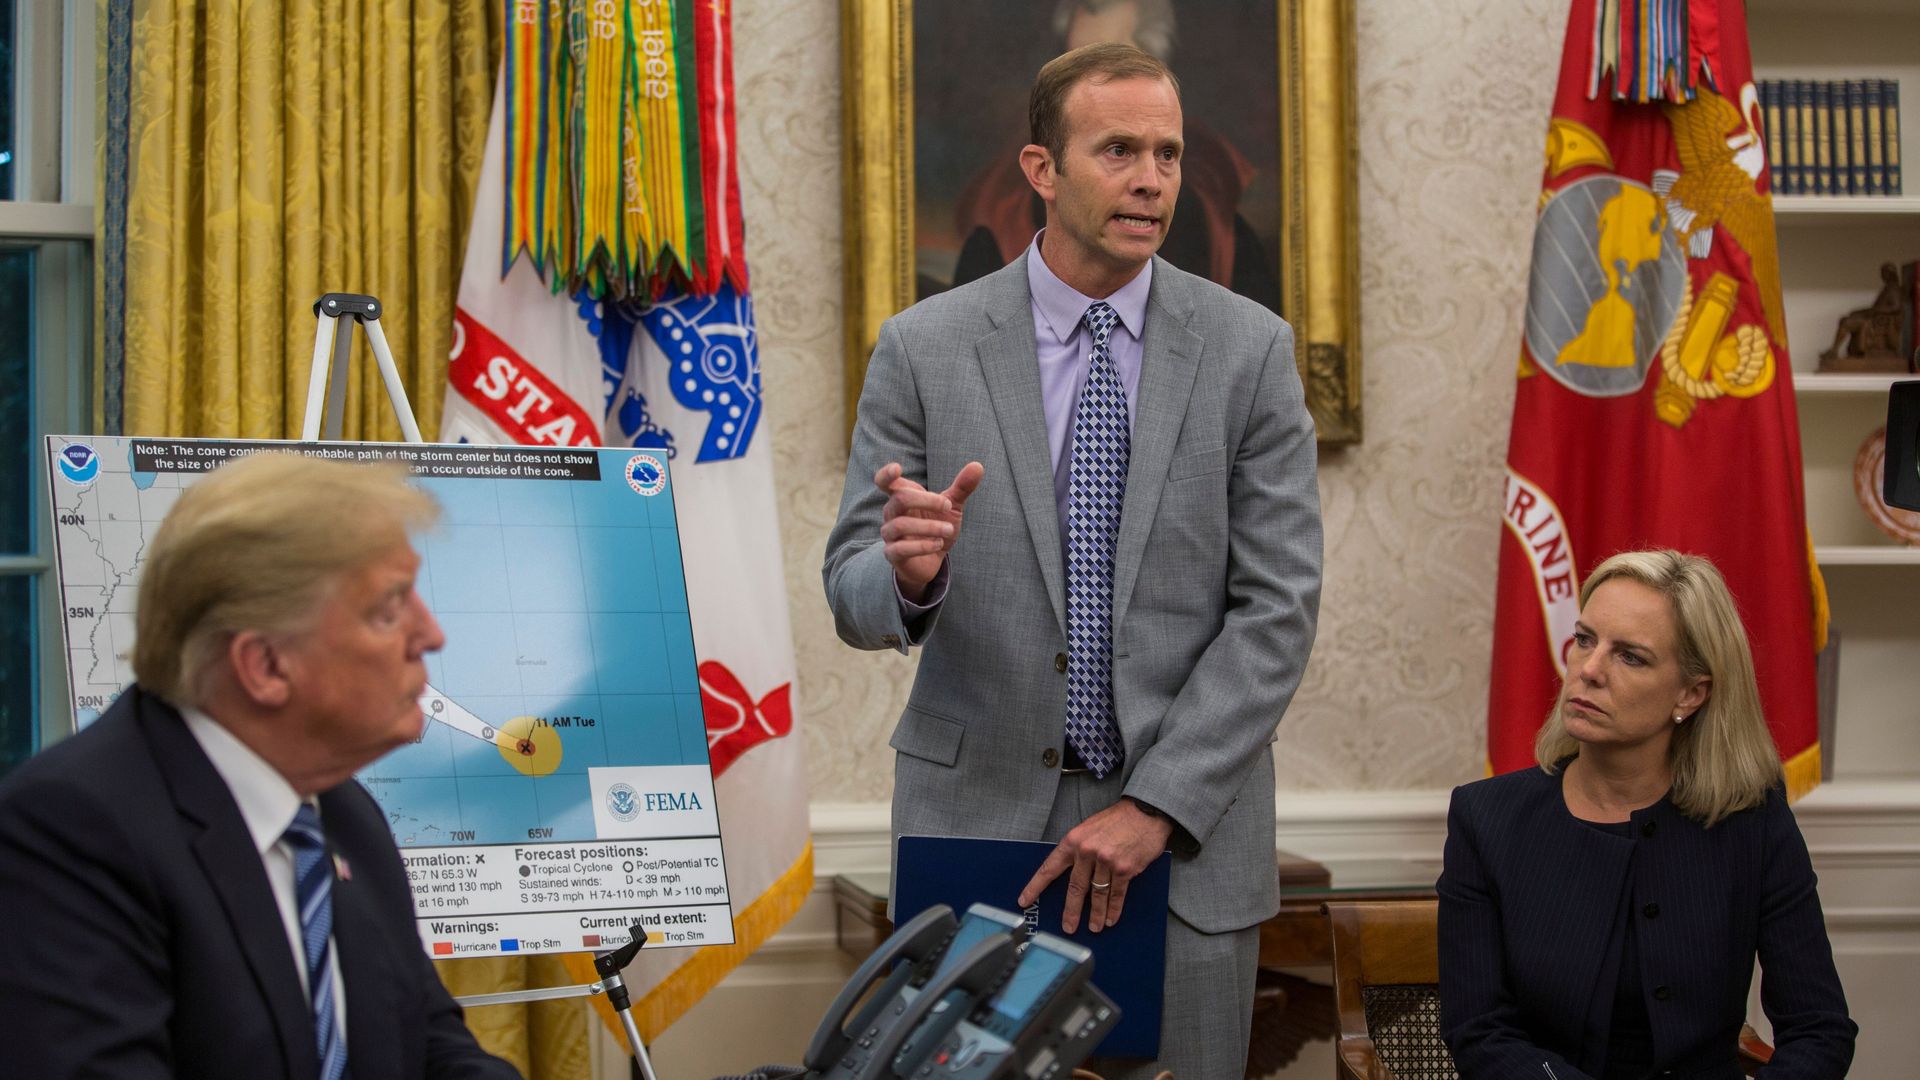 FEMA Administrator Brock Long with President Donald Trump and Homeland Security Secretary Kirstjen Nielsen. Photo: Zach Gibson/AFP/Getty Images